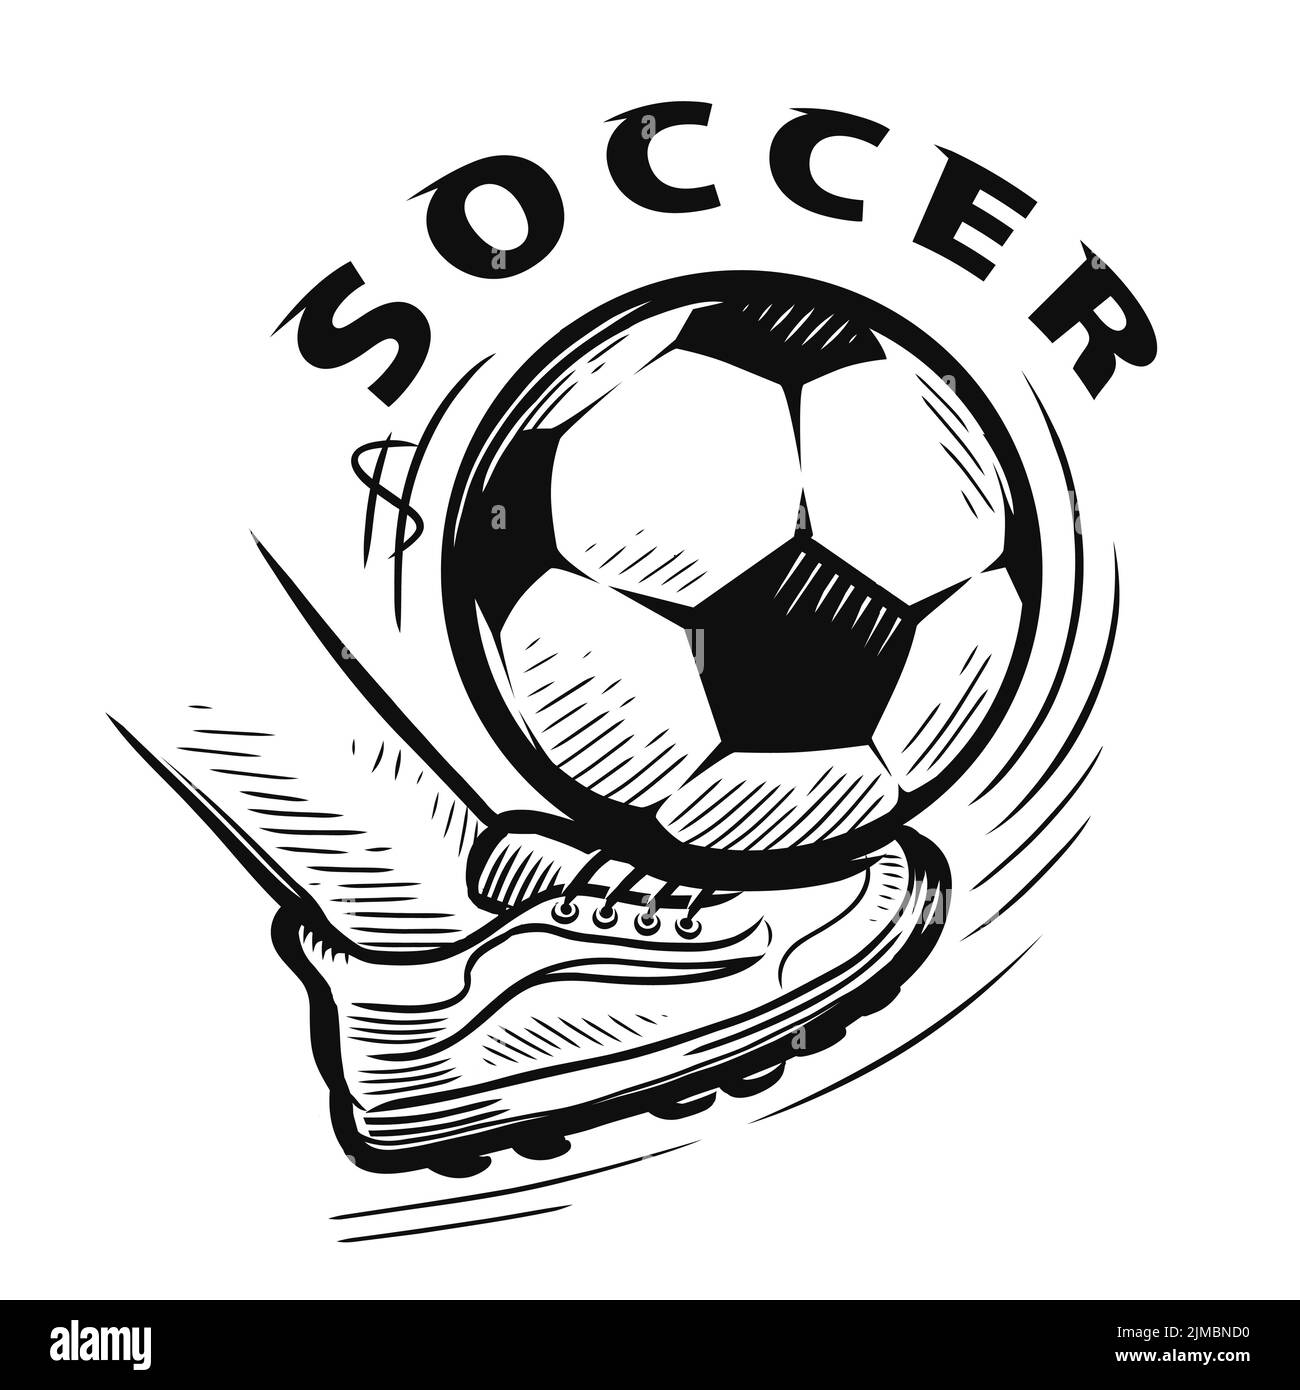 Foot cleat with spikes kicking a soccer ball. Football and soccer sports mascot. Vector sketch illustration Stock Vector